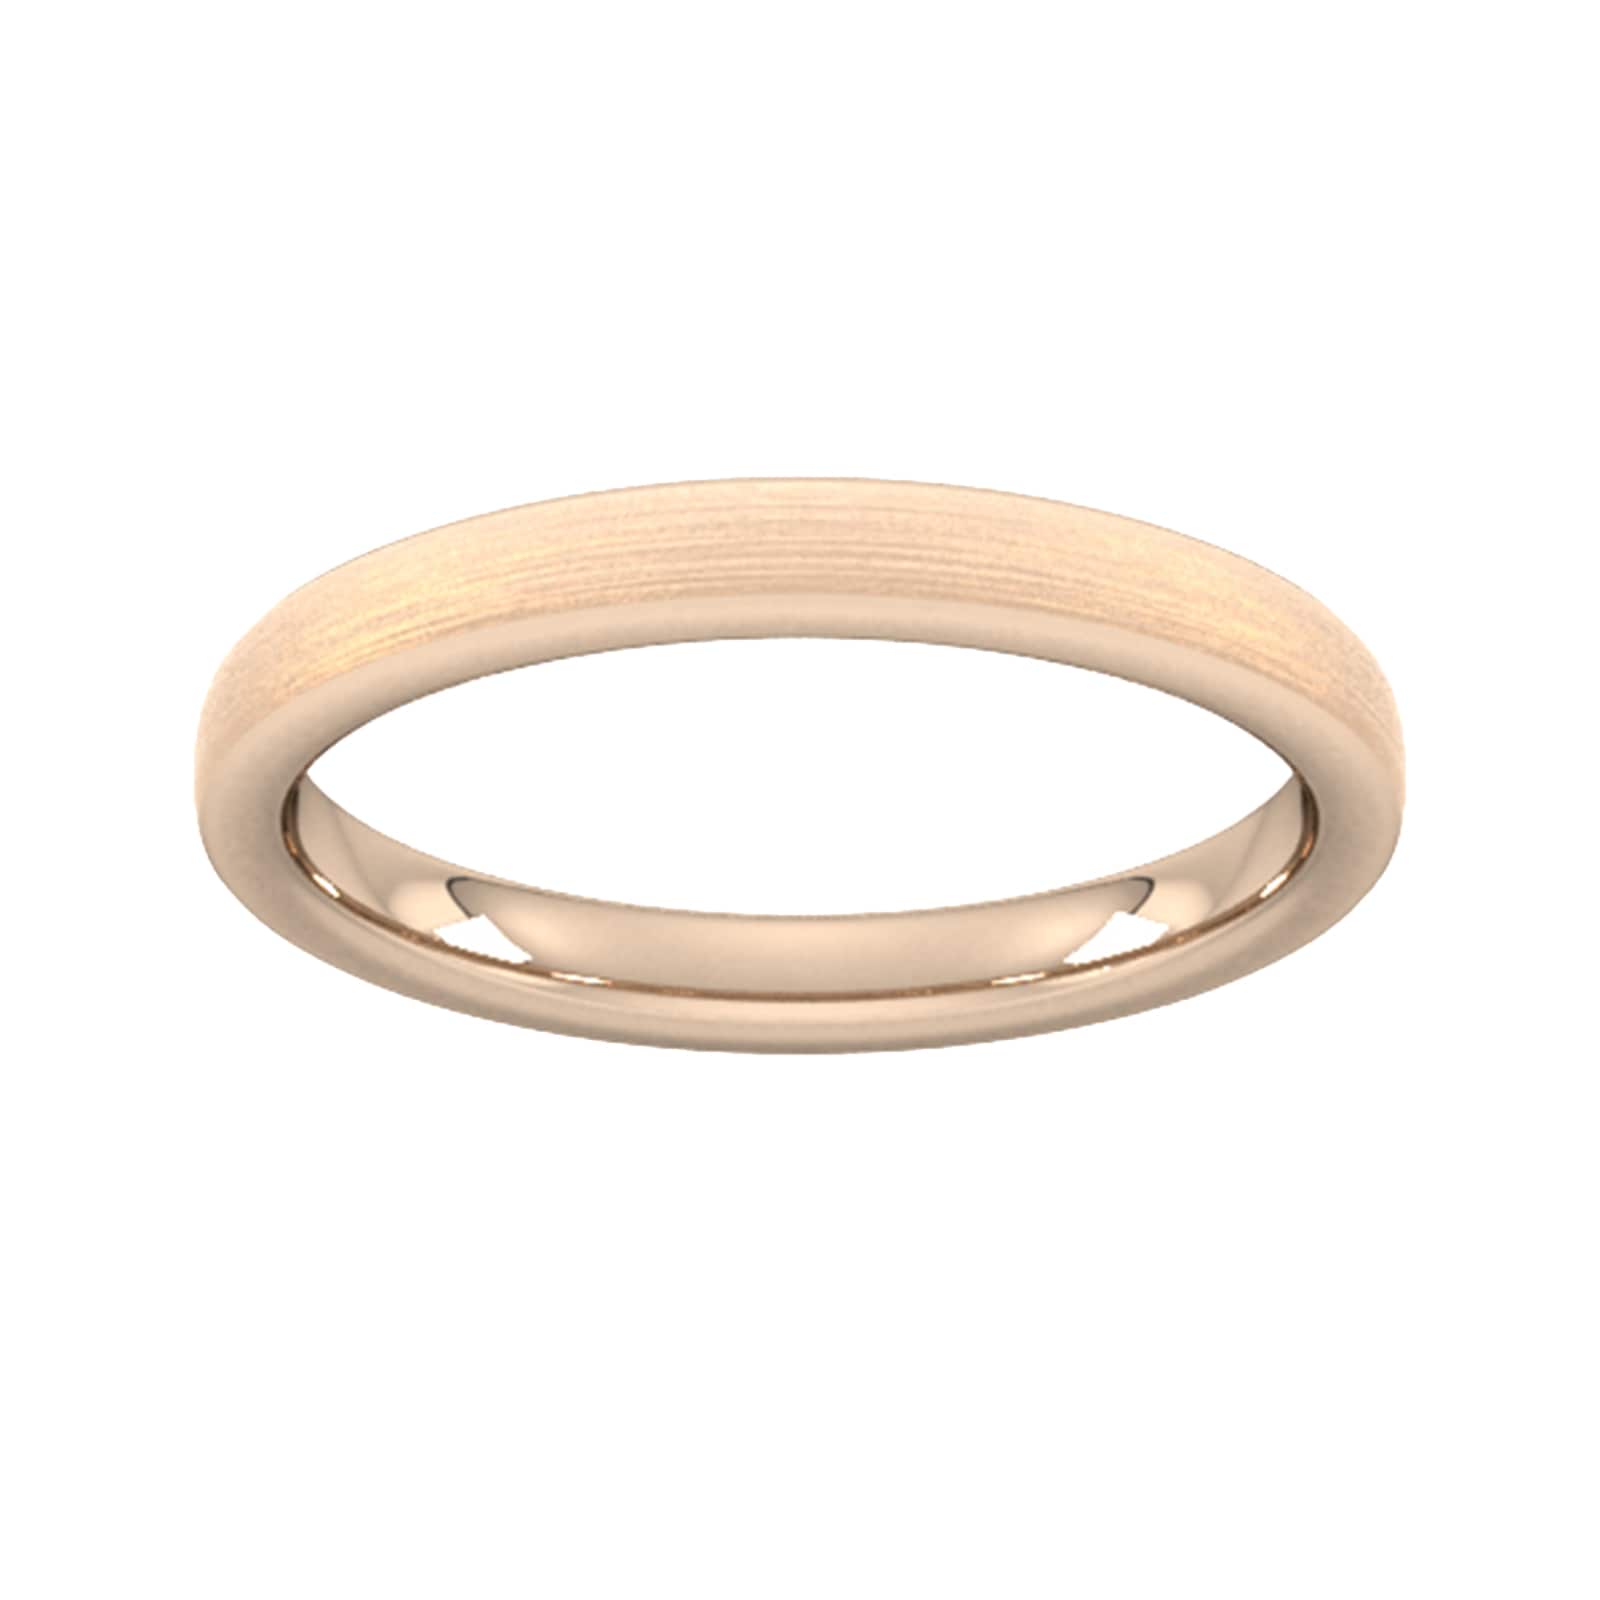 2.5mm Slight Court Heavy Polished Chamfered Edges With Matt Centre Wedding Ring In 18 Carat Rose Gold - Ring Size G